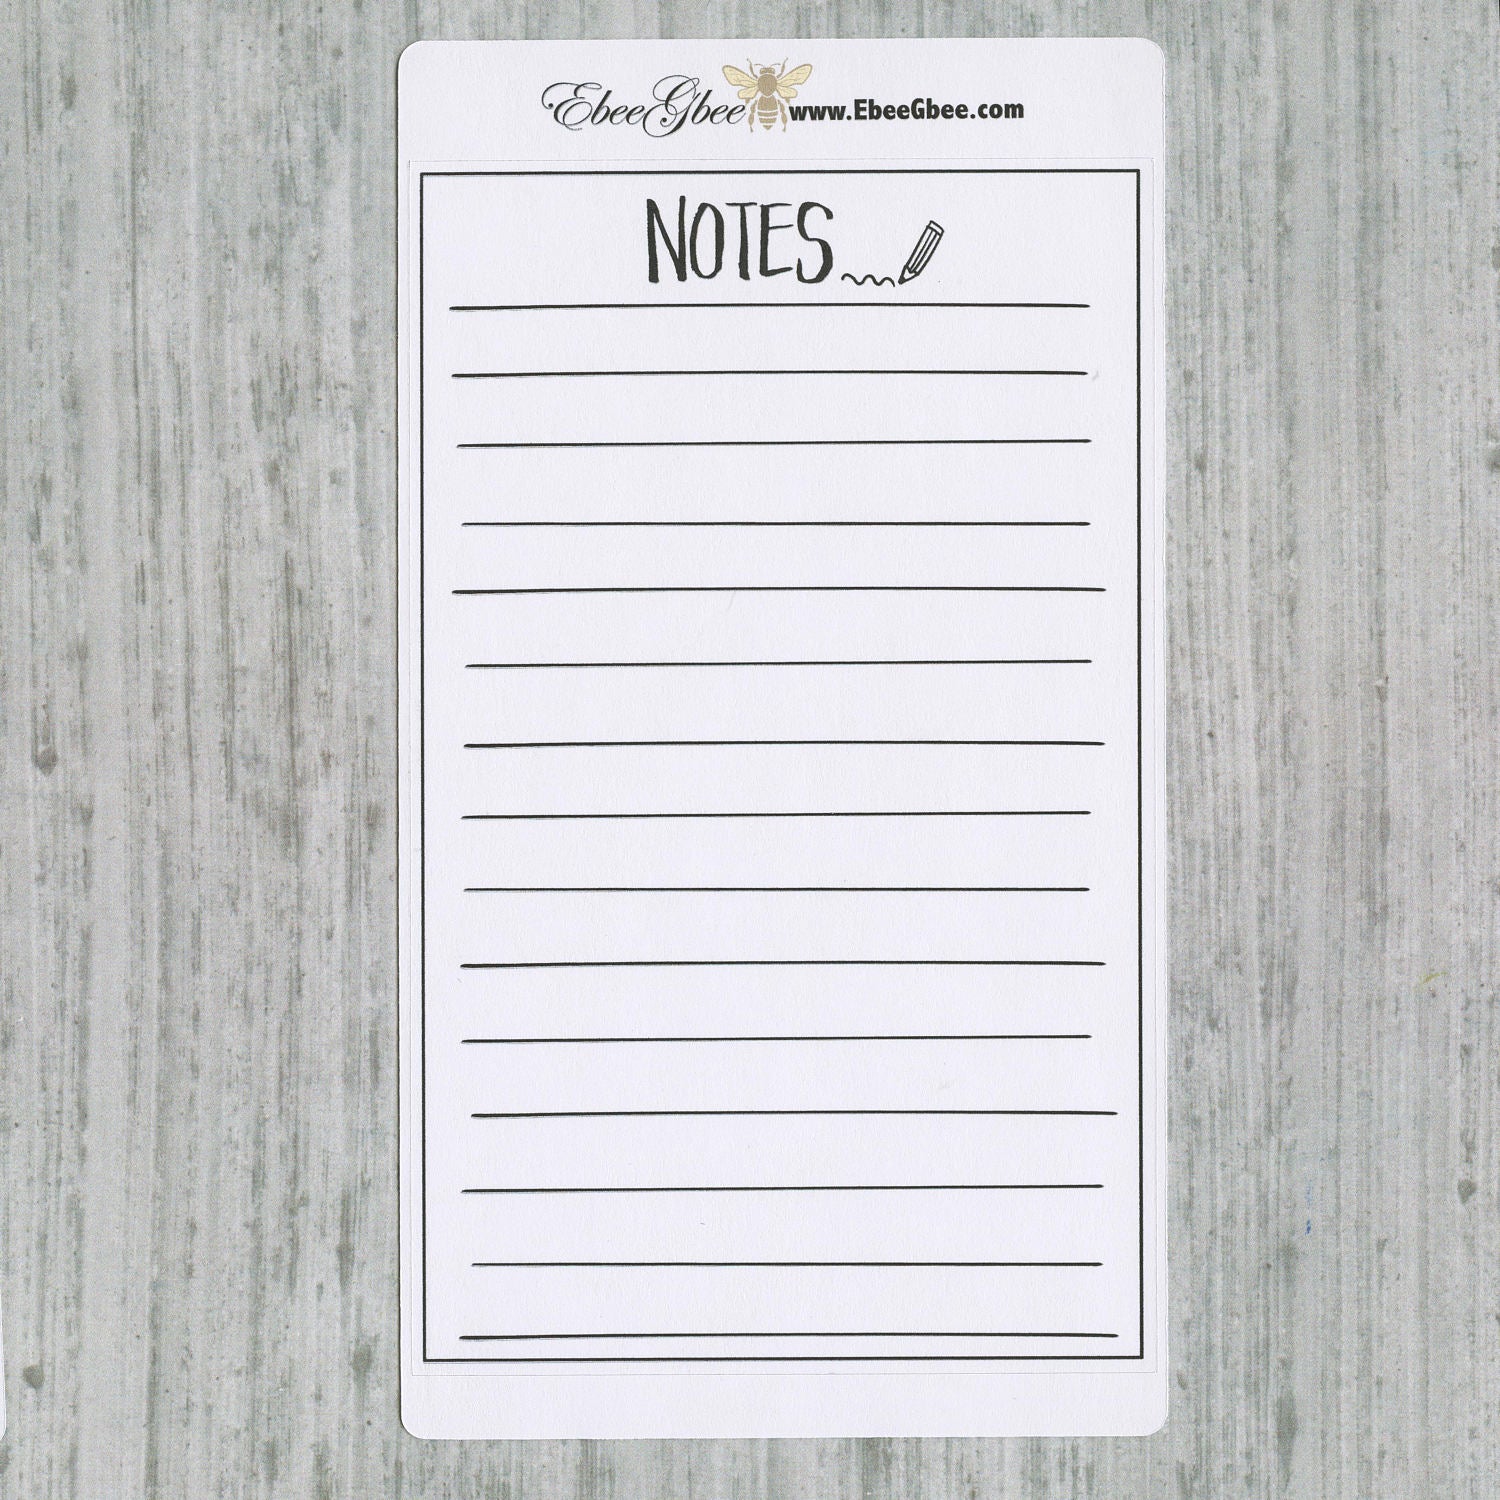 NOTES Double Tall Box Hand Drawn Large Box Note Page Planner Stickers